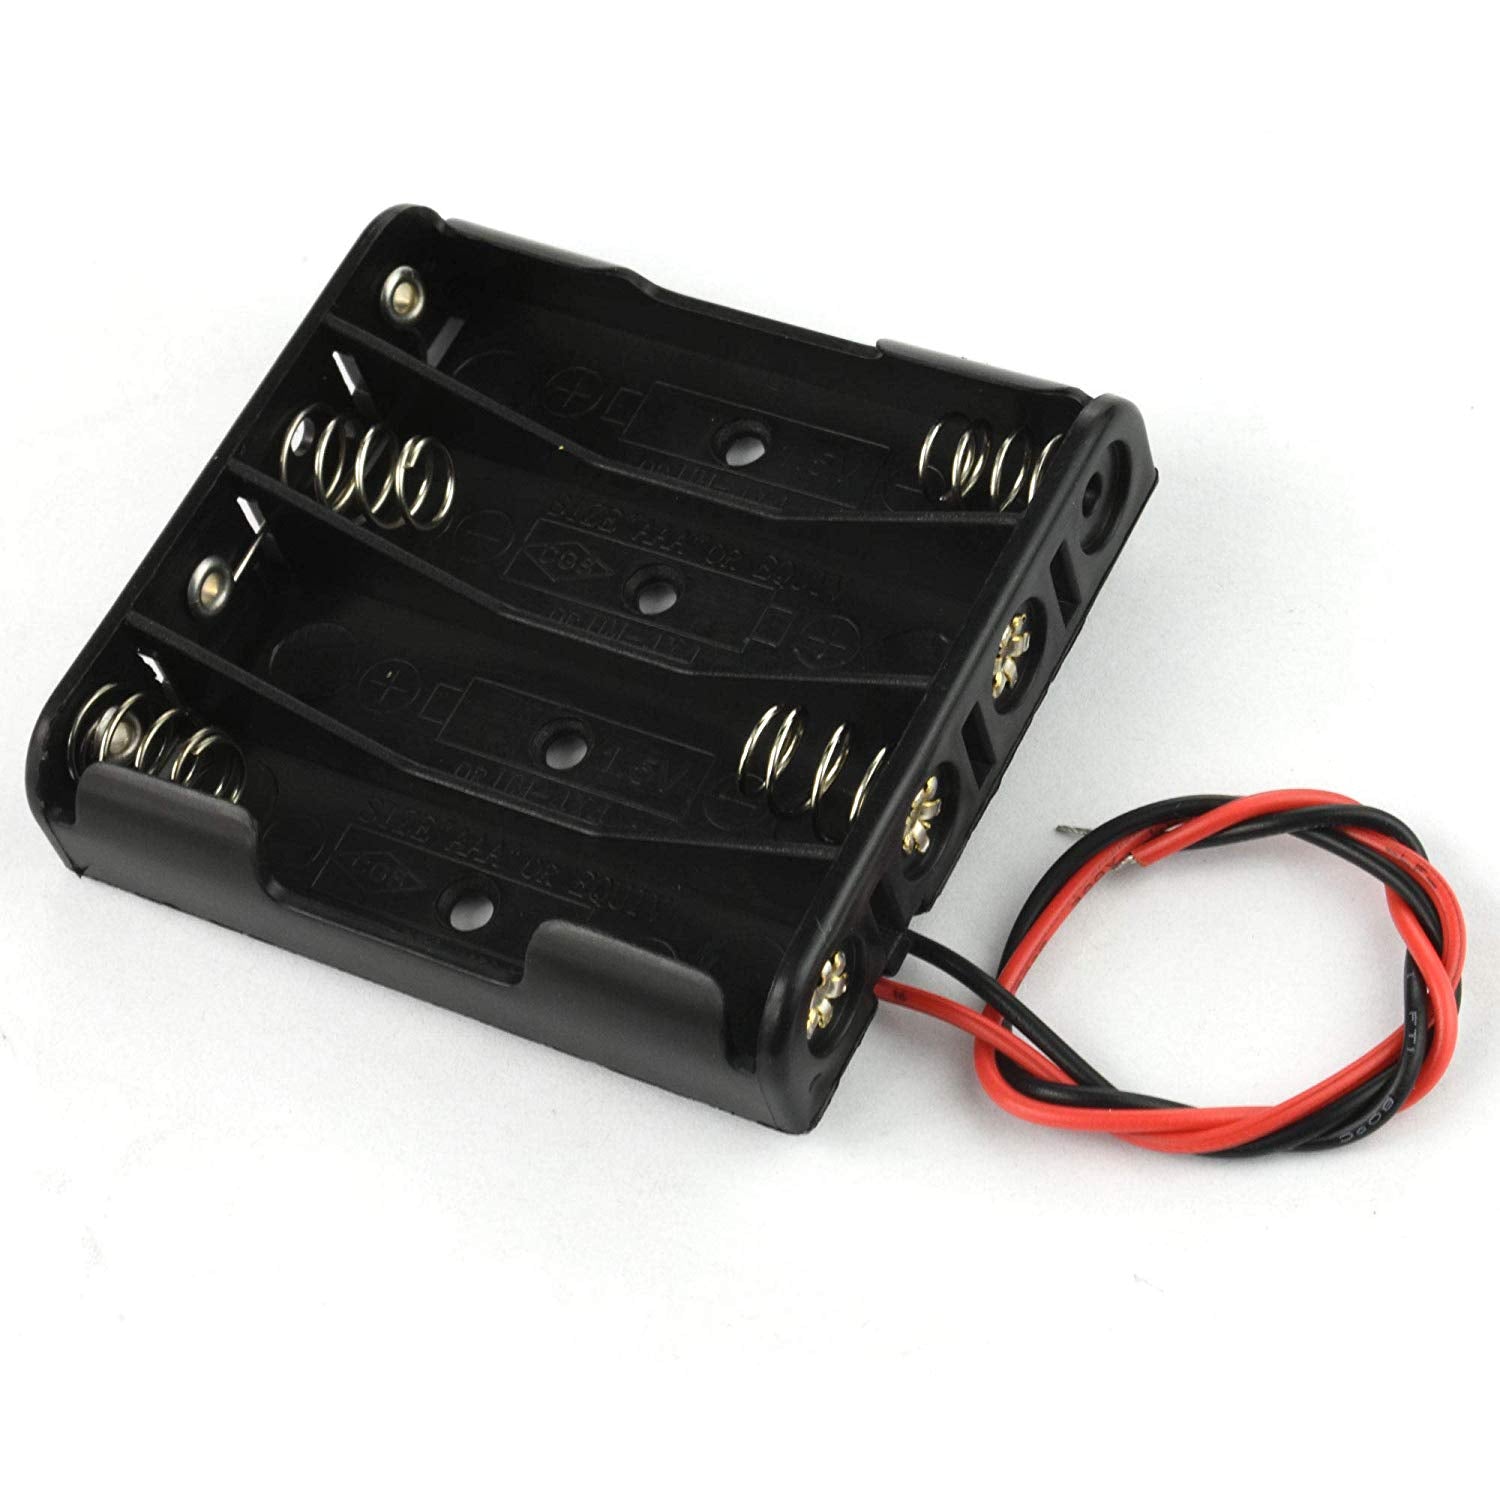 AAA x4 Battery Holder Box w/Pigtail Leads